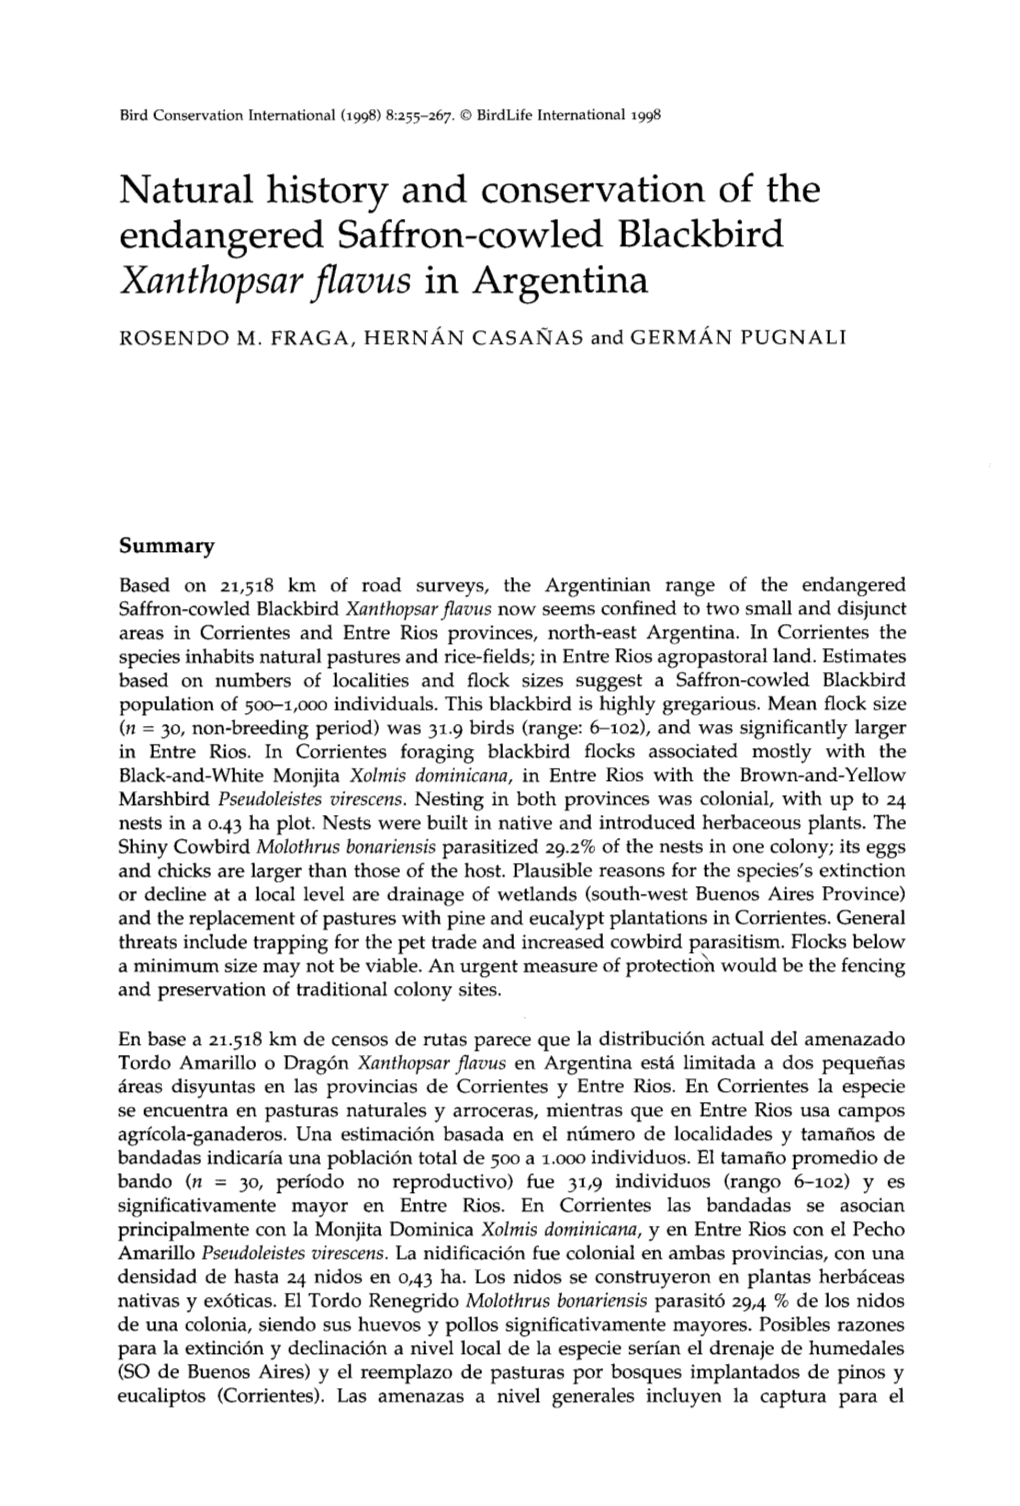 Natural History and Conservation of the Endangered Saffron-Cowled Blackbird Xanthopsar Flavus in Argentina